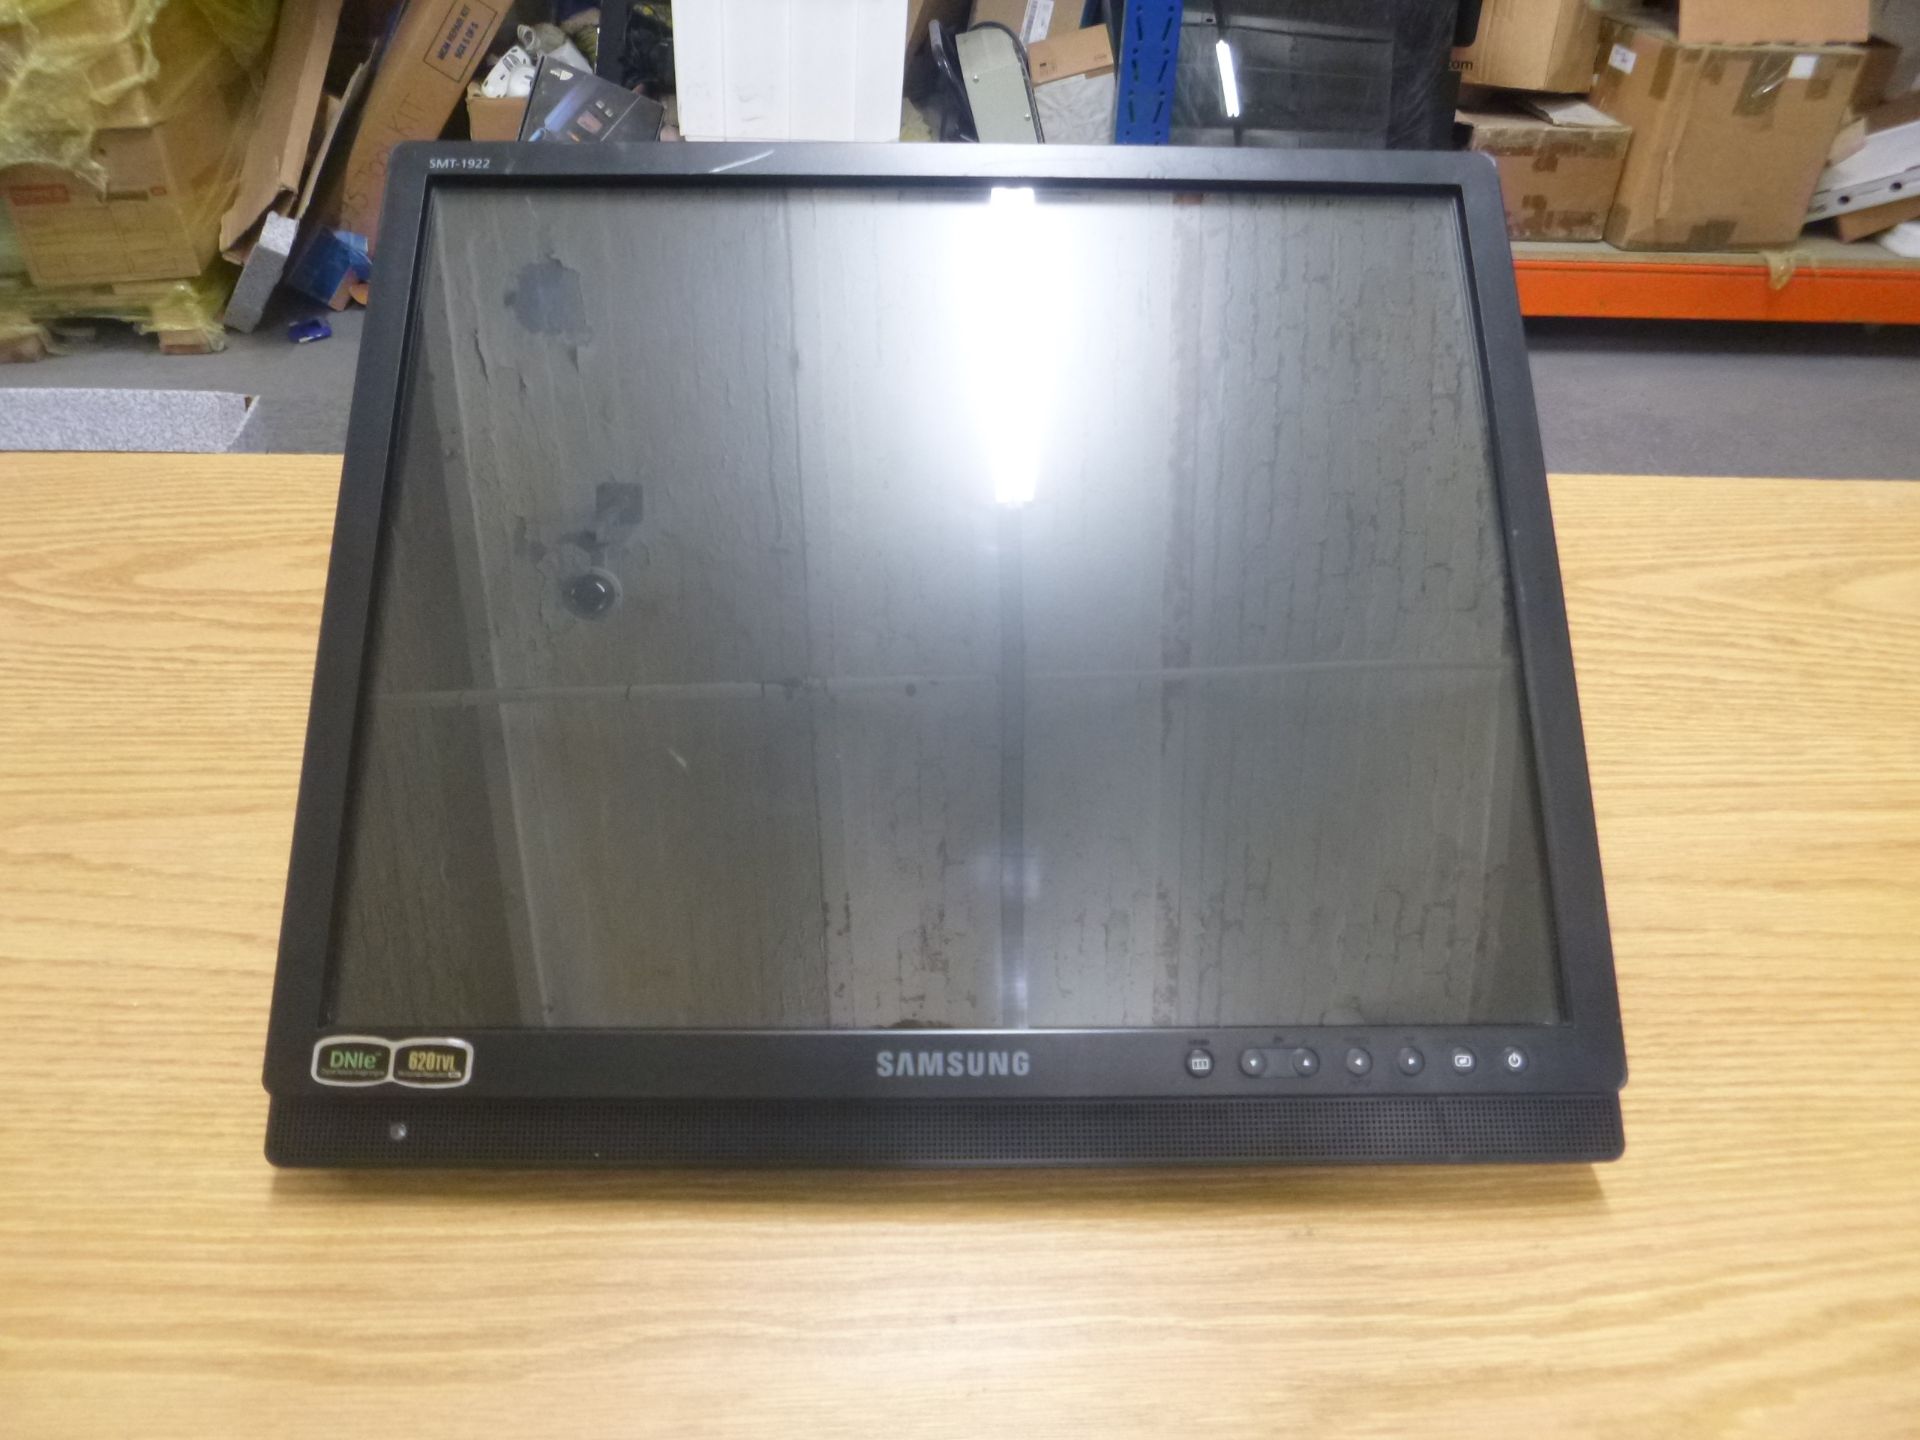 Samsung 19" Inch LED CCTV Security Monitor. Model SMT-1922P. BNC VIDEO IN & OUT, VGA PORT.